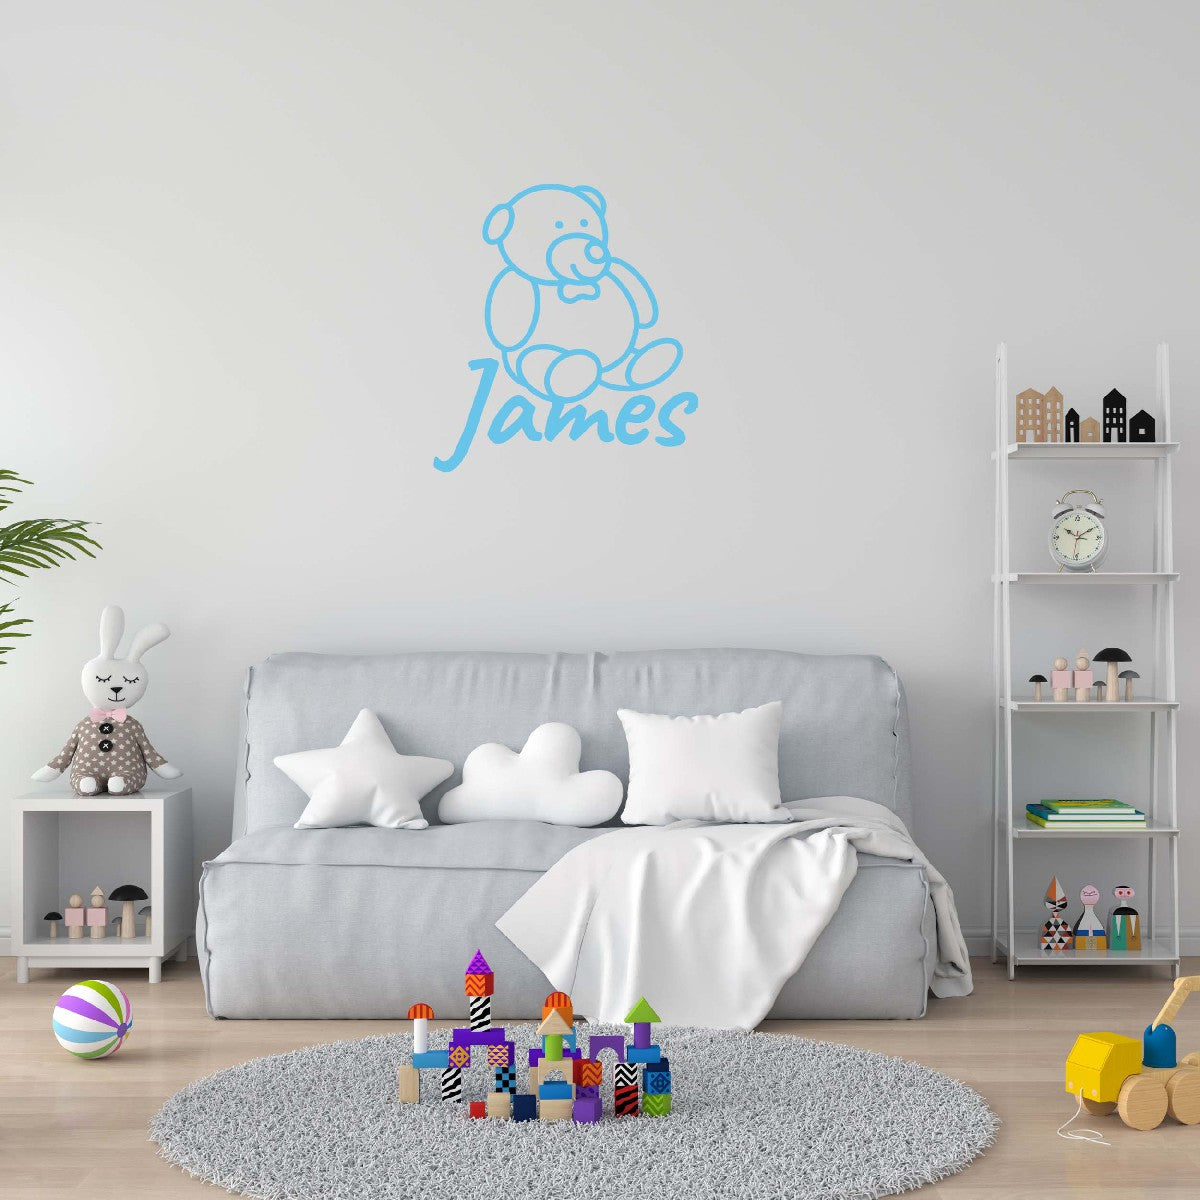 Personalized Name Stickers with Cute Teddy Bear - Durable Custom Name Stickers for Kids Bedroom Laptop Furniture - Lovely Name Wall Decals for Girls and Boys